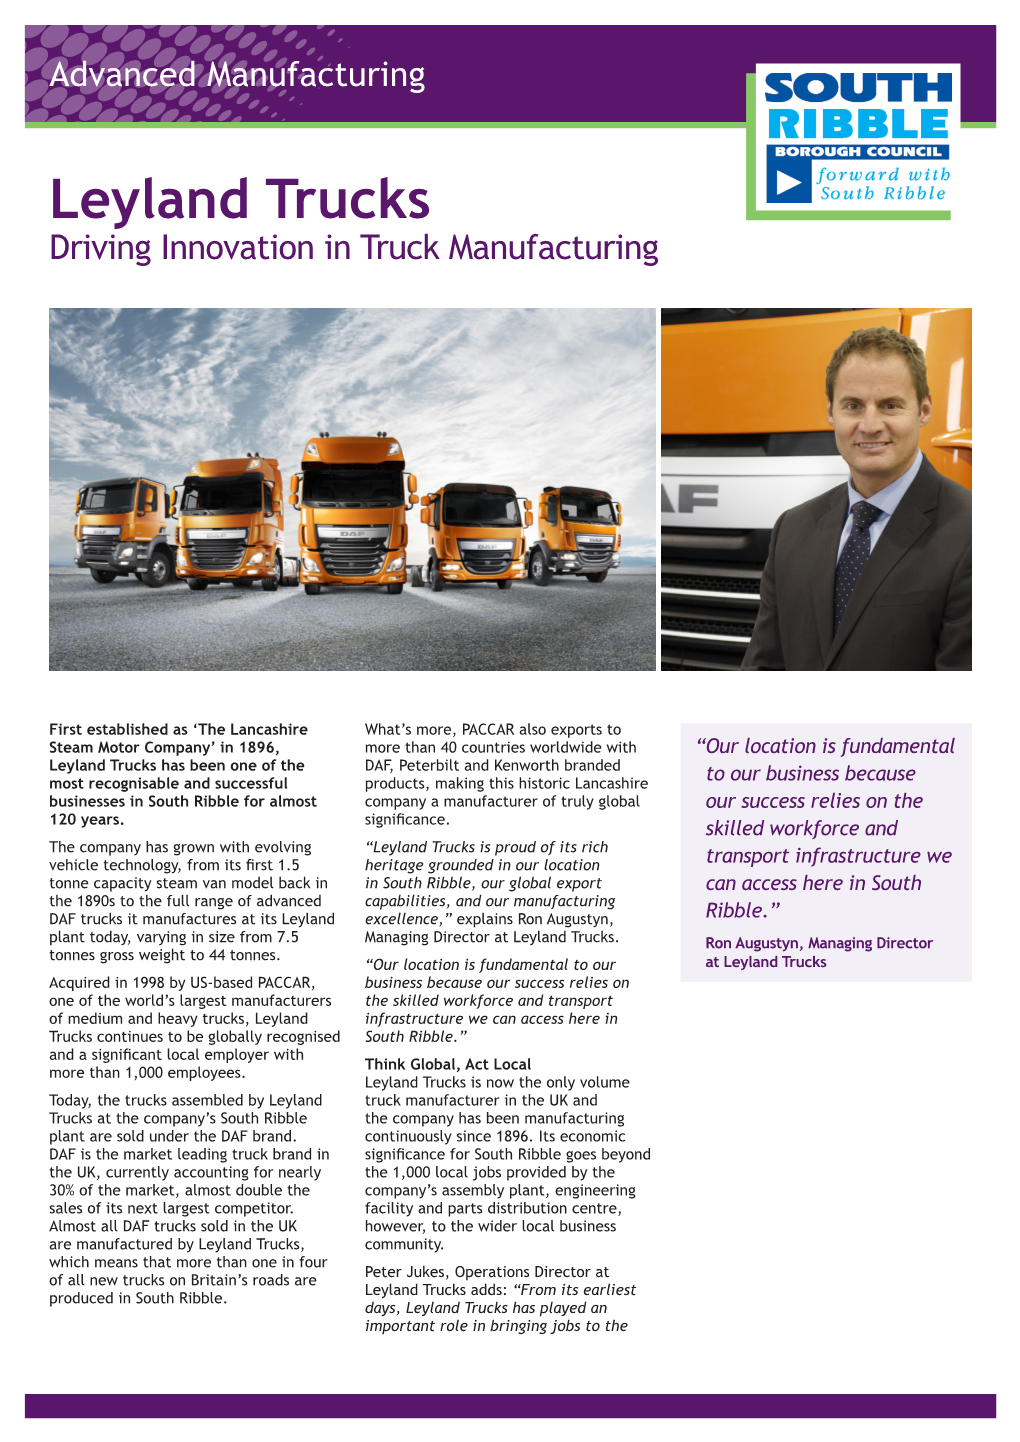 Leyland Trucks Driving Innovation in Truck Manufacturing